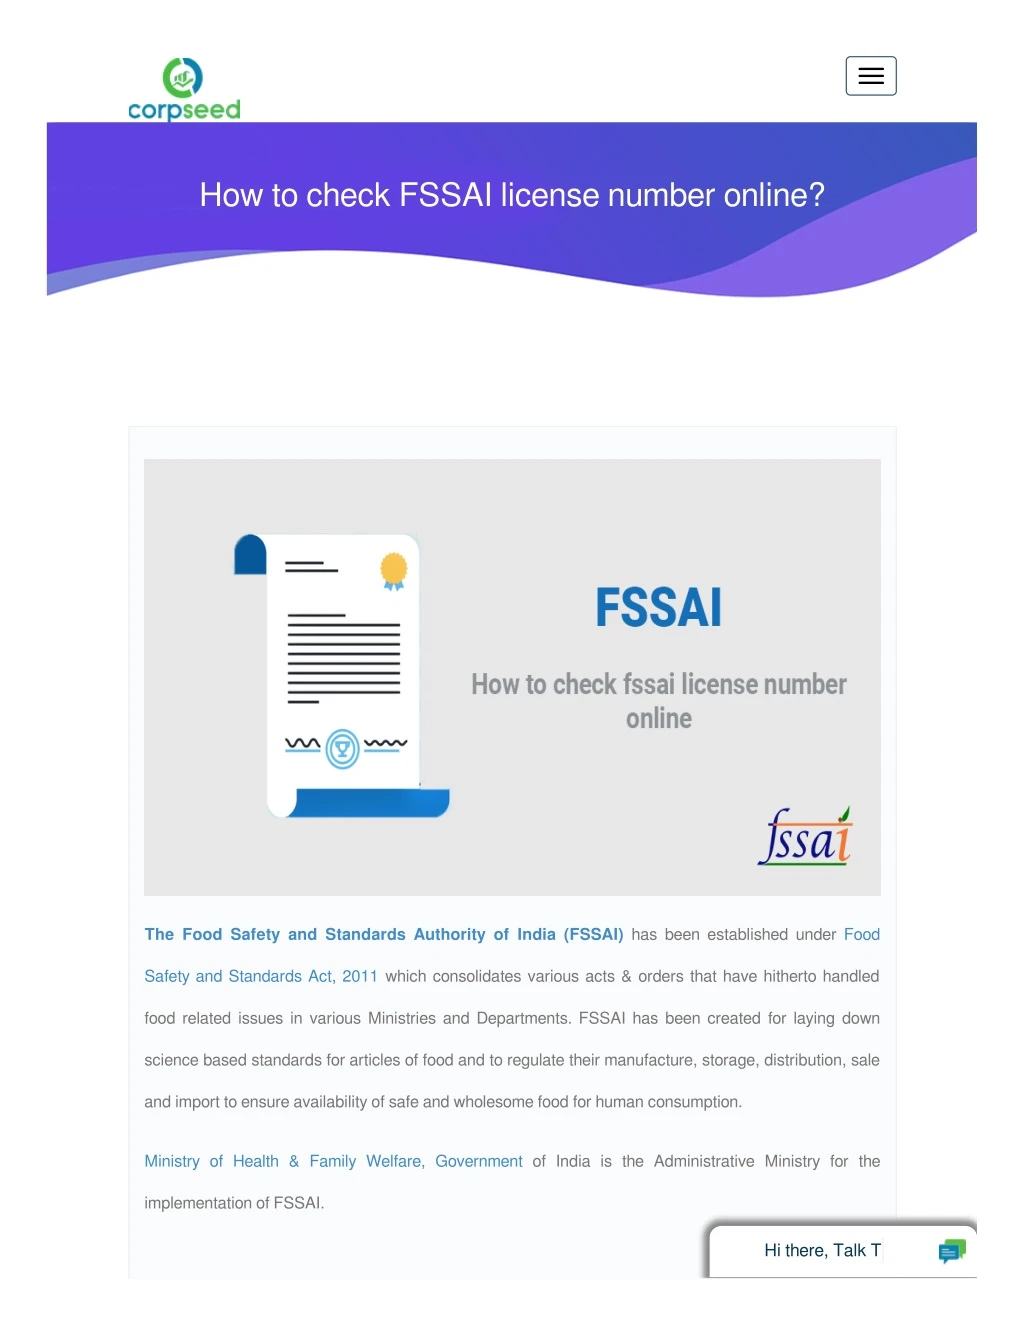 how to check fssai license number online